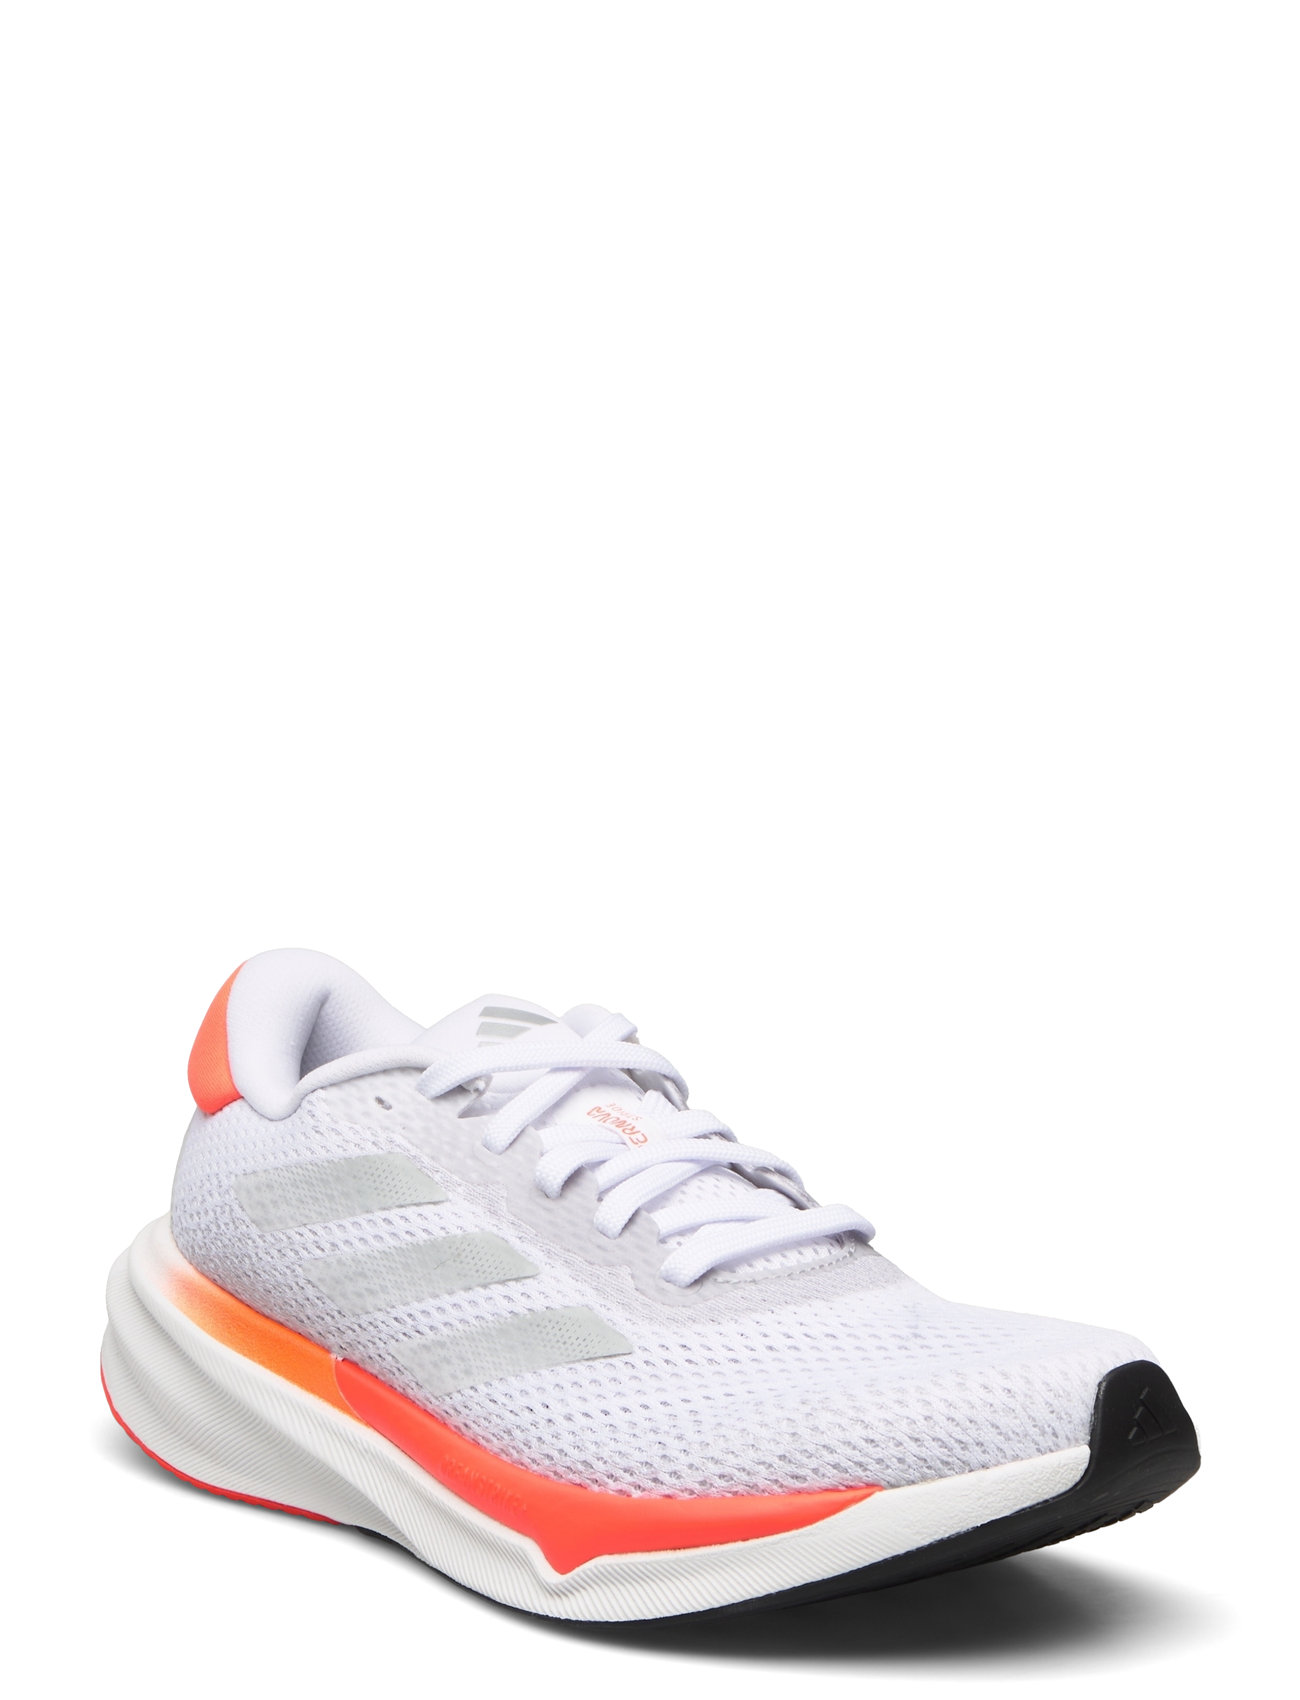 Supernova Stride W Sport Sport Shoes Running Shoes White Adidas Performance